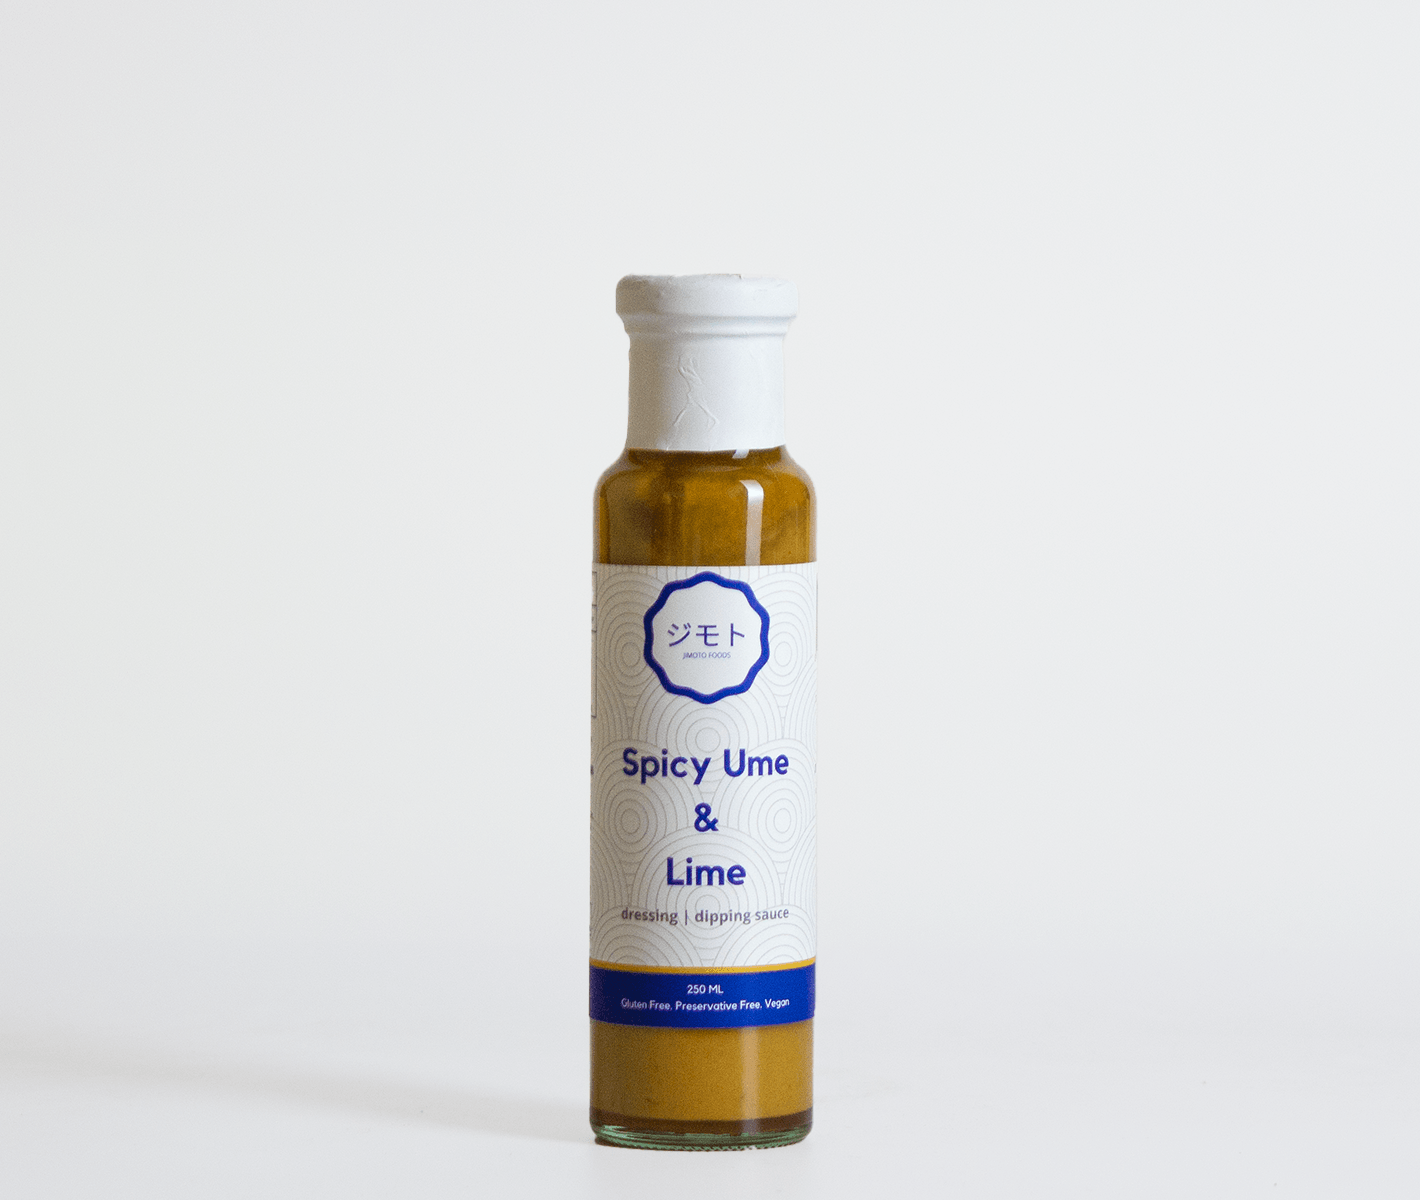 Spicy Ume & Lime (250ml) - DRNKS